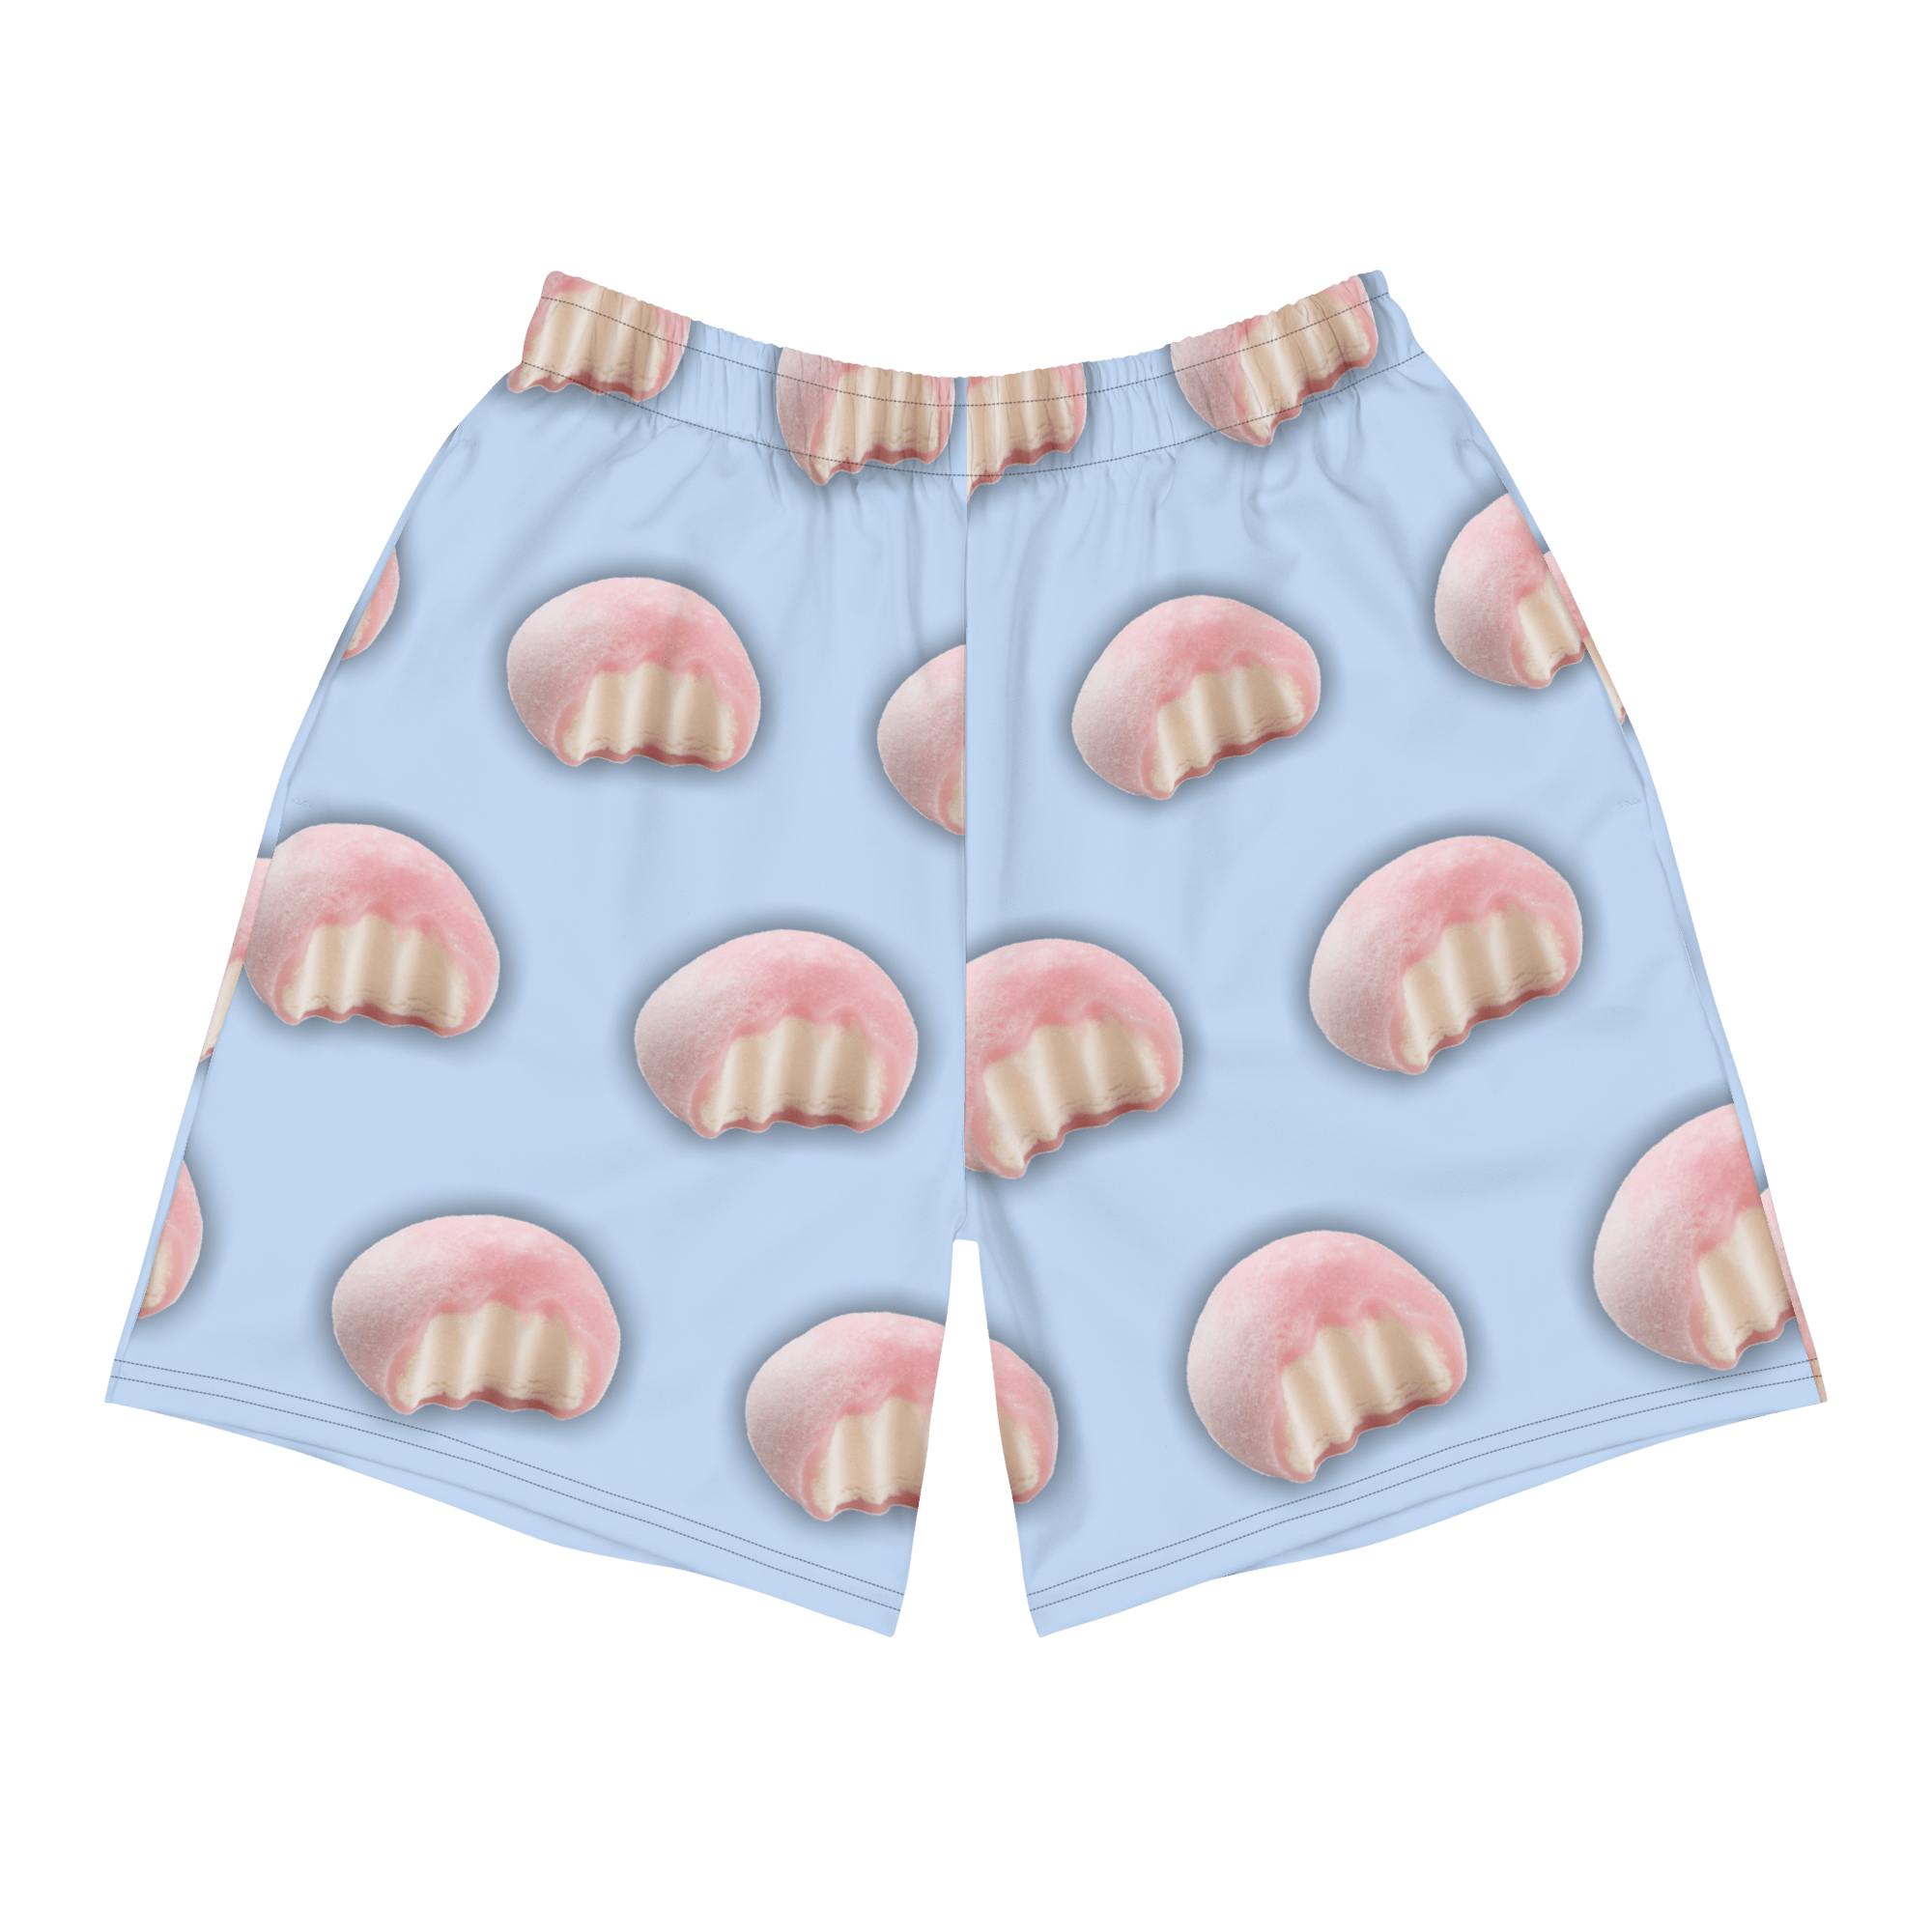 Peaches and Eggplants on Pink Fabric